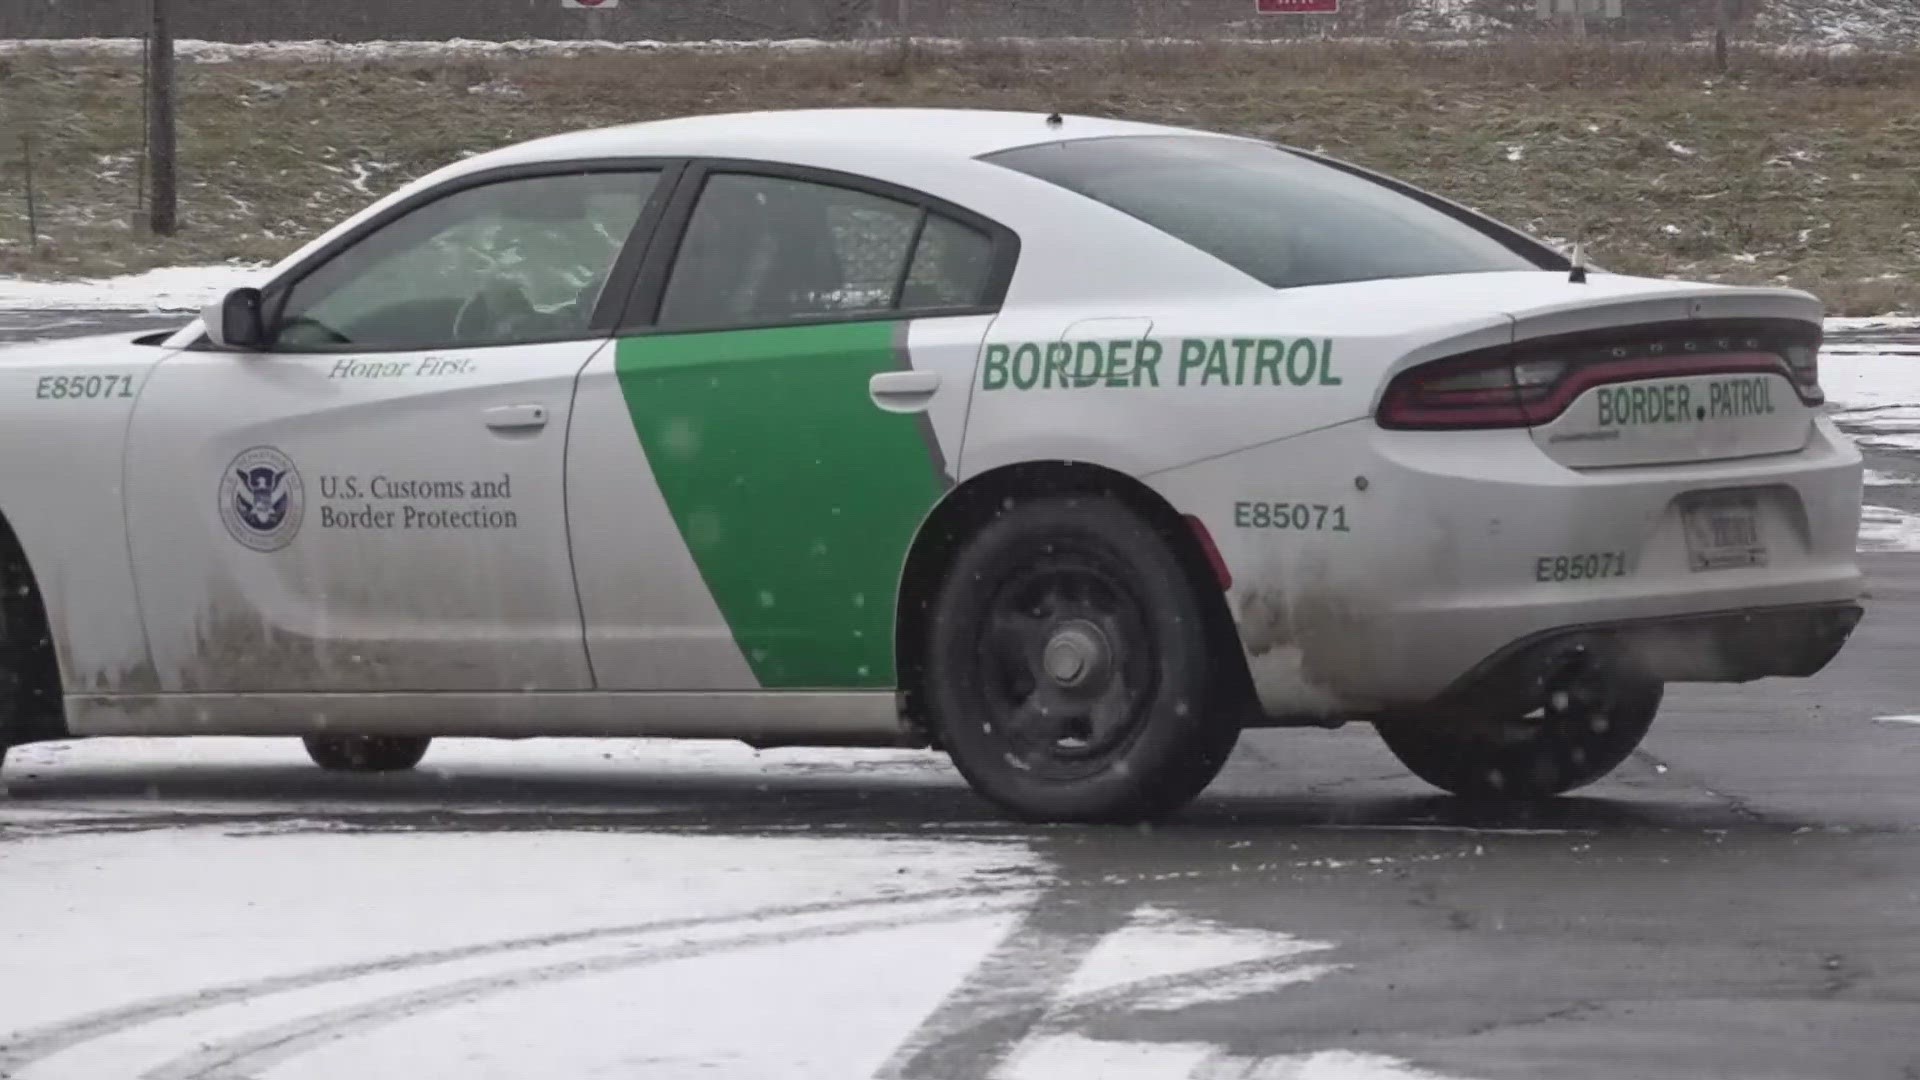 The acting chief of U.S. Border Patrol's Houlton Sector as well as the U.S. Attorney agree Canada's visa laws could be a contributing factor.